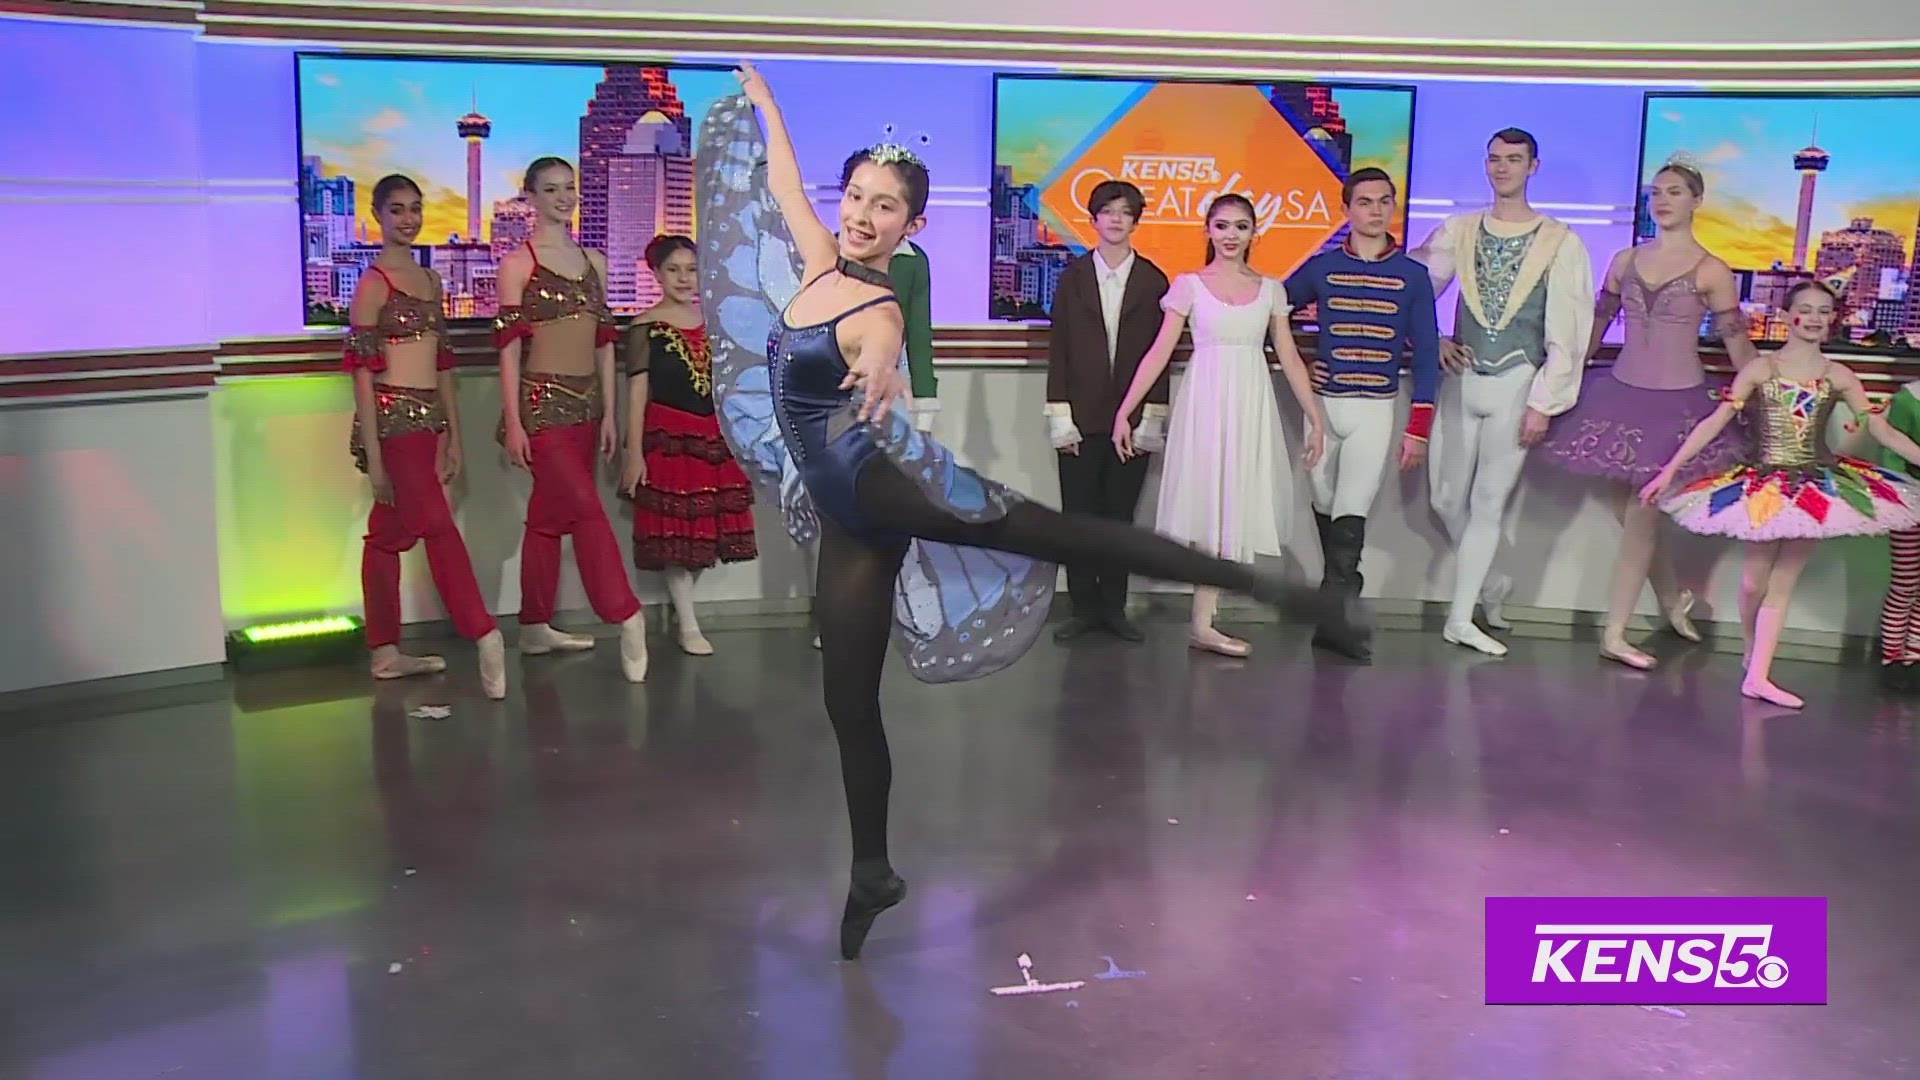 The Children's Ballet of SA stop by the studio to give us a preview of their holiday production of The Children's Nutcracker.